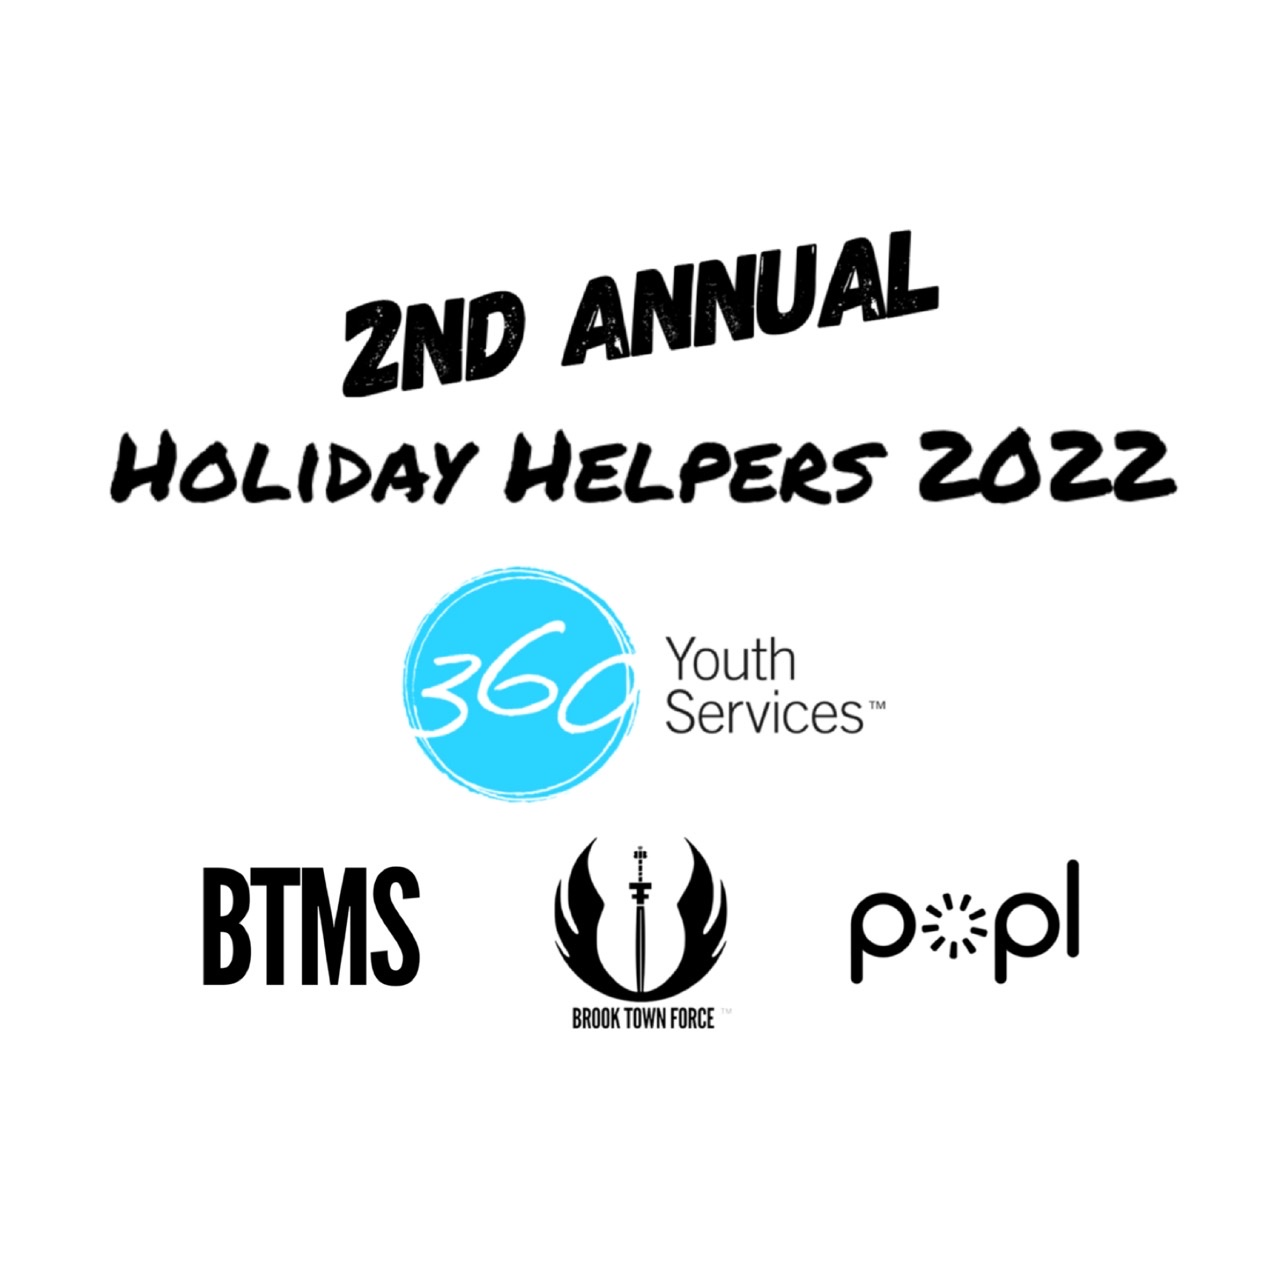 2nd Annual Holiday Helpers 2022 Helping Homeless Kids During Holidays by giving care packages, bedding sets, gift cards & more! on dic. 23, 19:00@Bar Louie - Buy tickets and Get information on BTMS LLC 